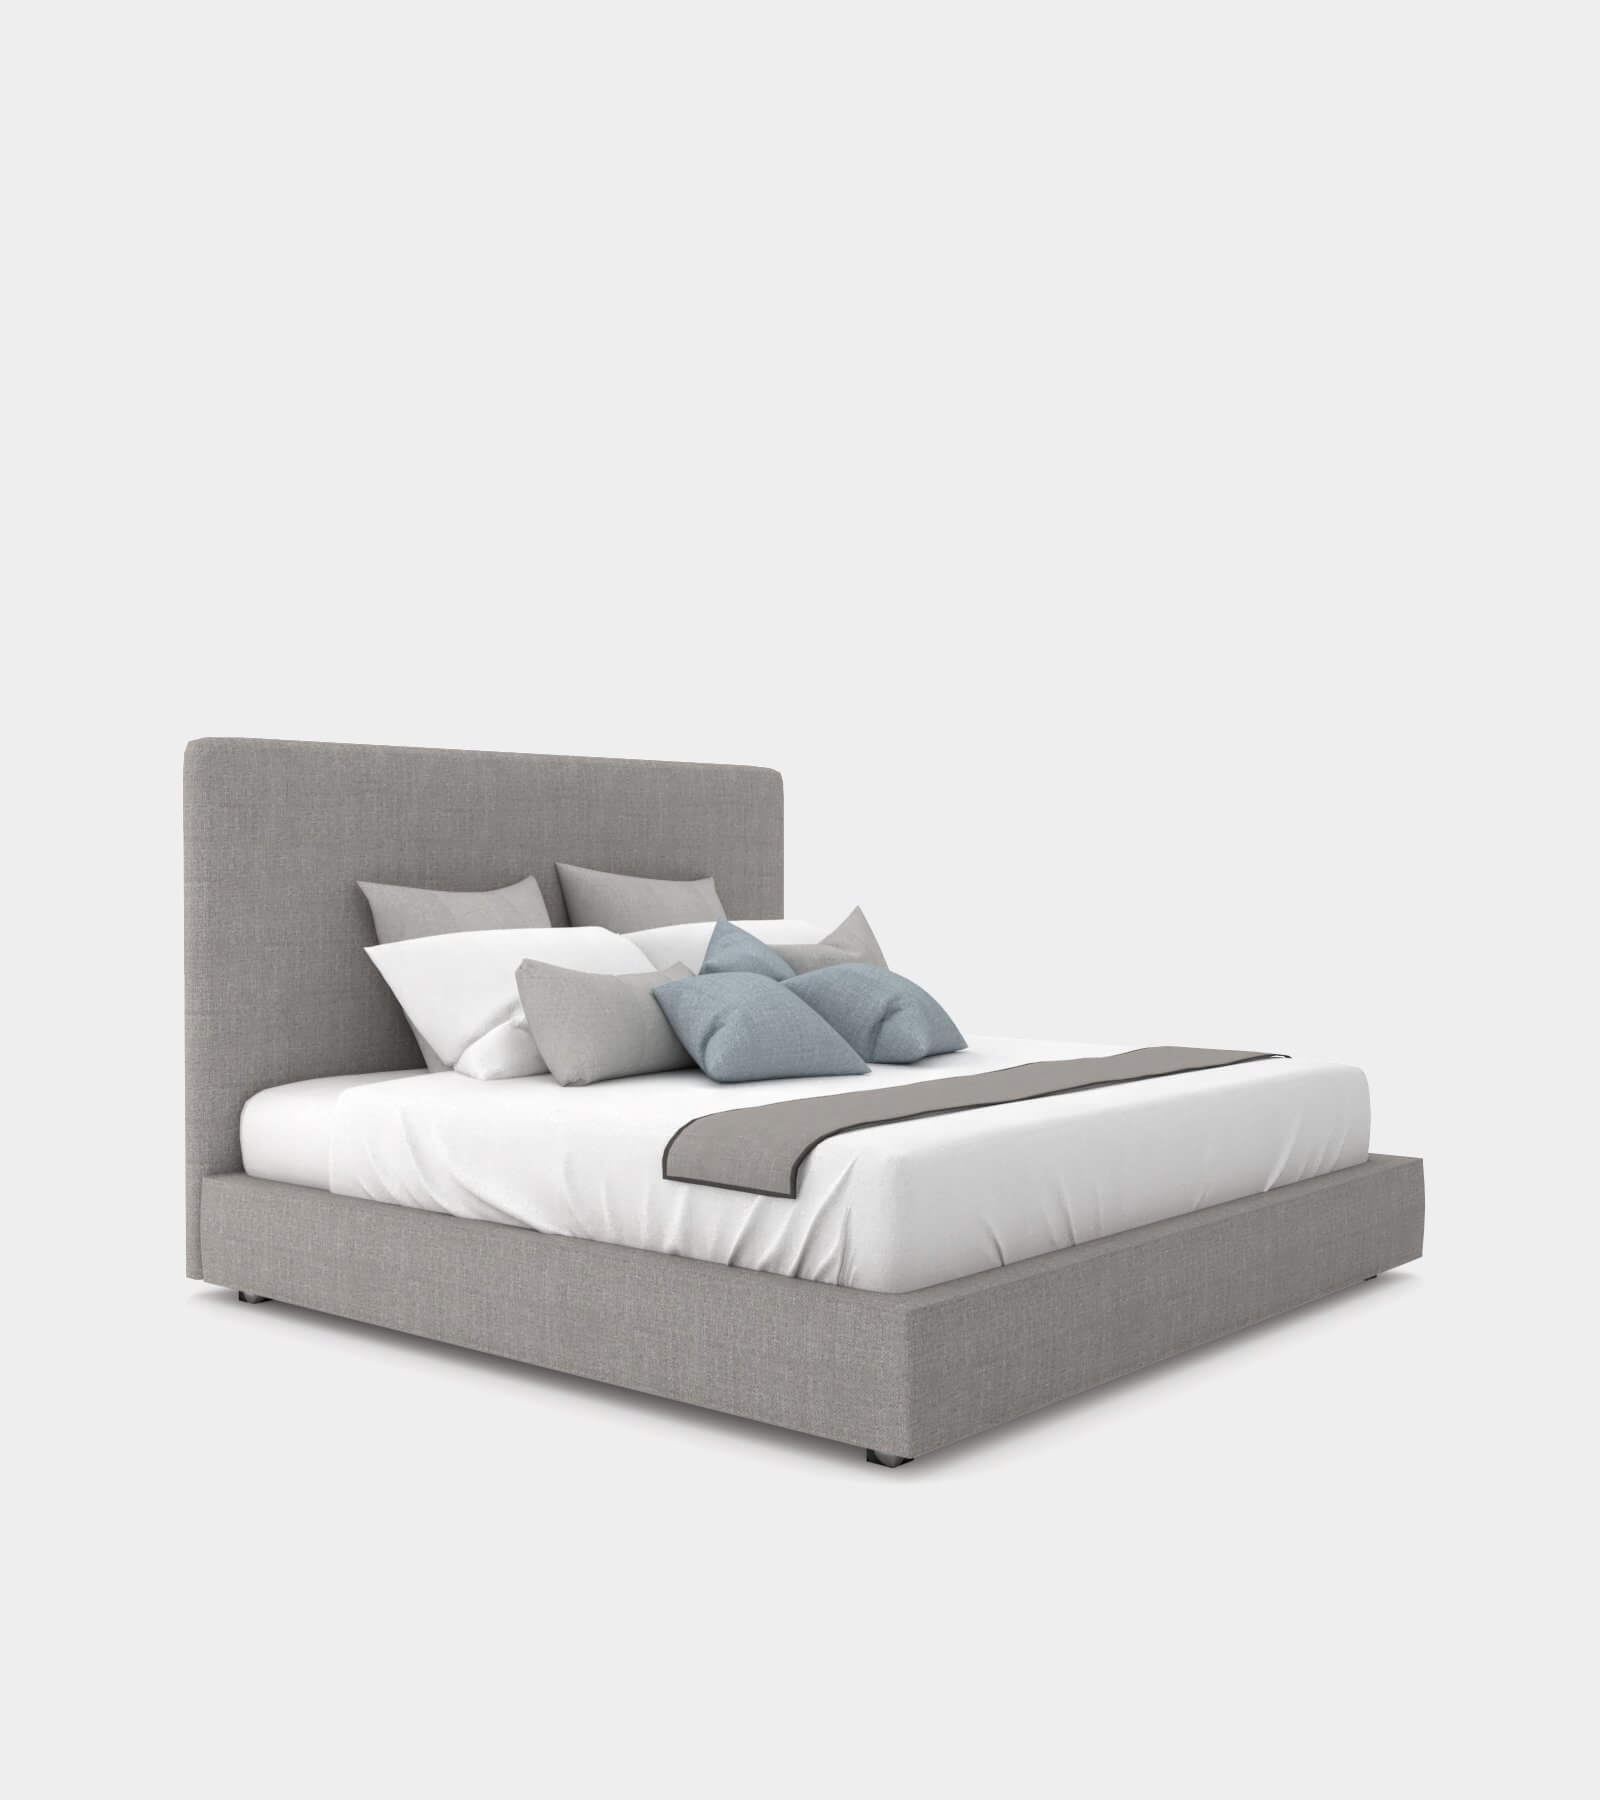 Modern double bed with a bed head - 3D Model